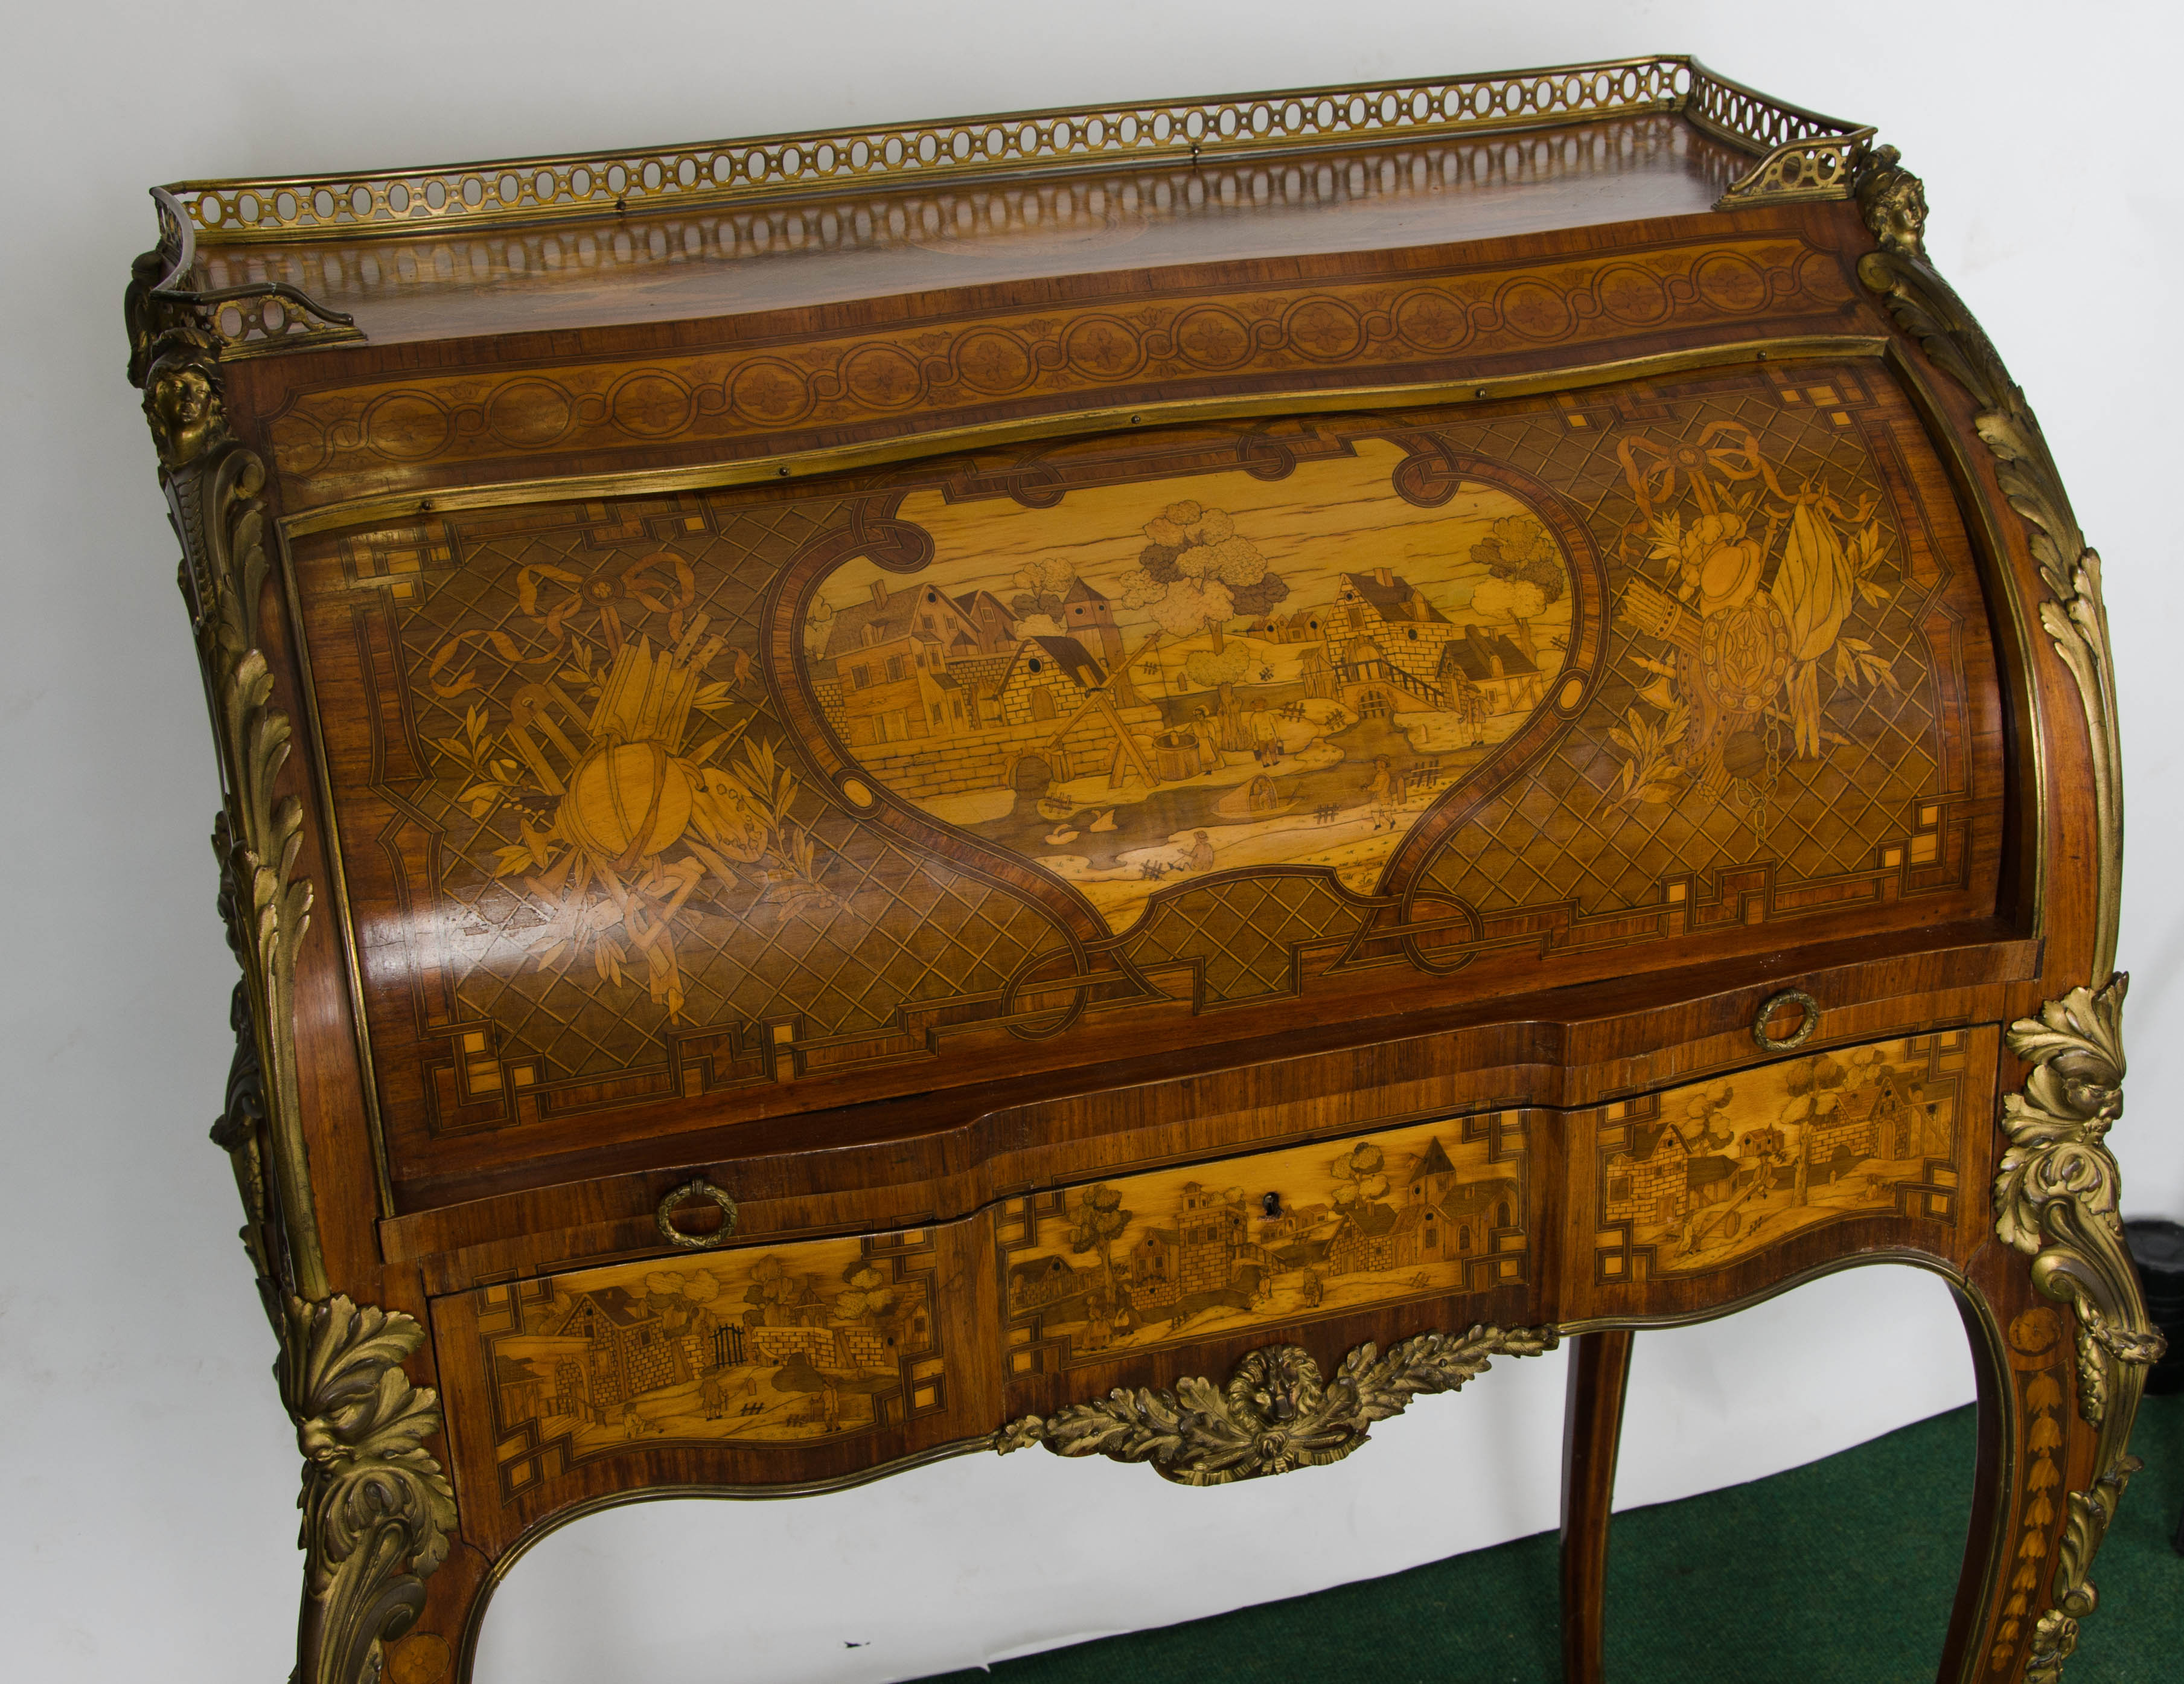 A fine quality 19th Century Louis XV style Marquetry inlaid bureau de dame, having wonderfully detailed scenes to the drawer fronts and cylinder, the sides and reverse having foliate decoration surrounding urns and musical instruments. A three